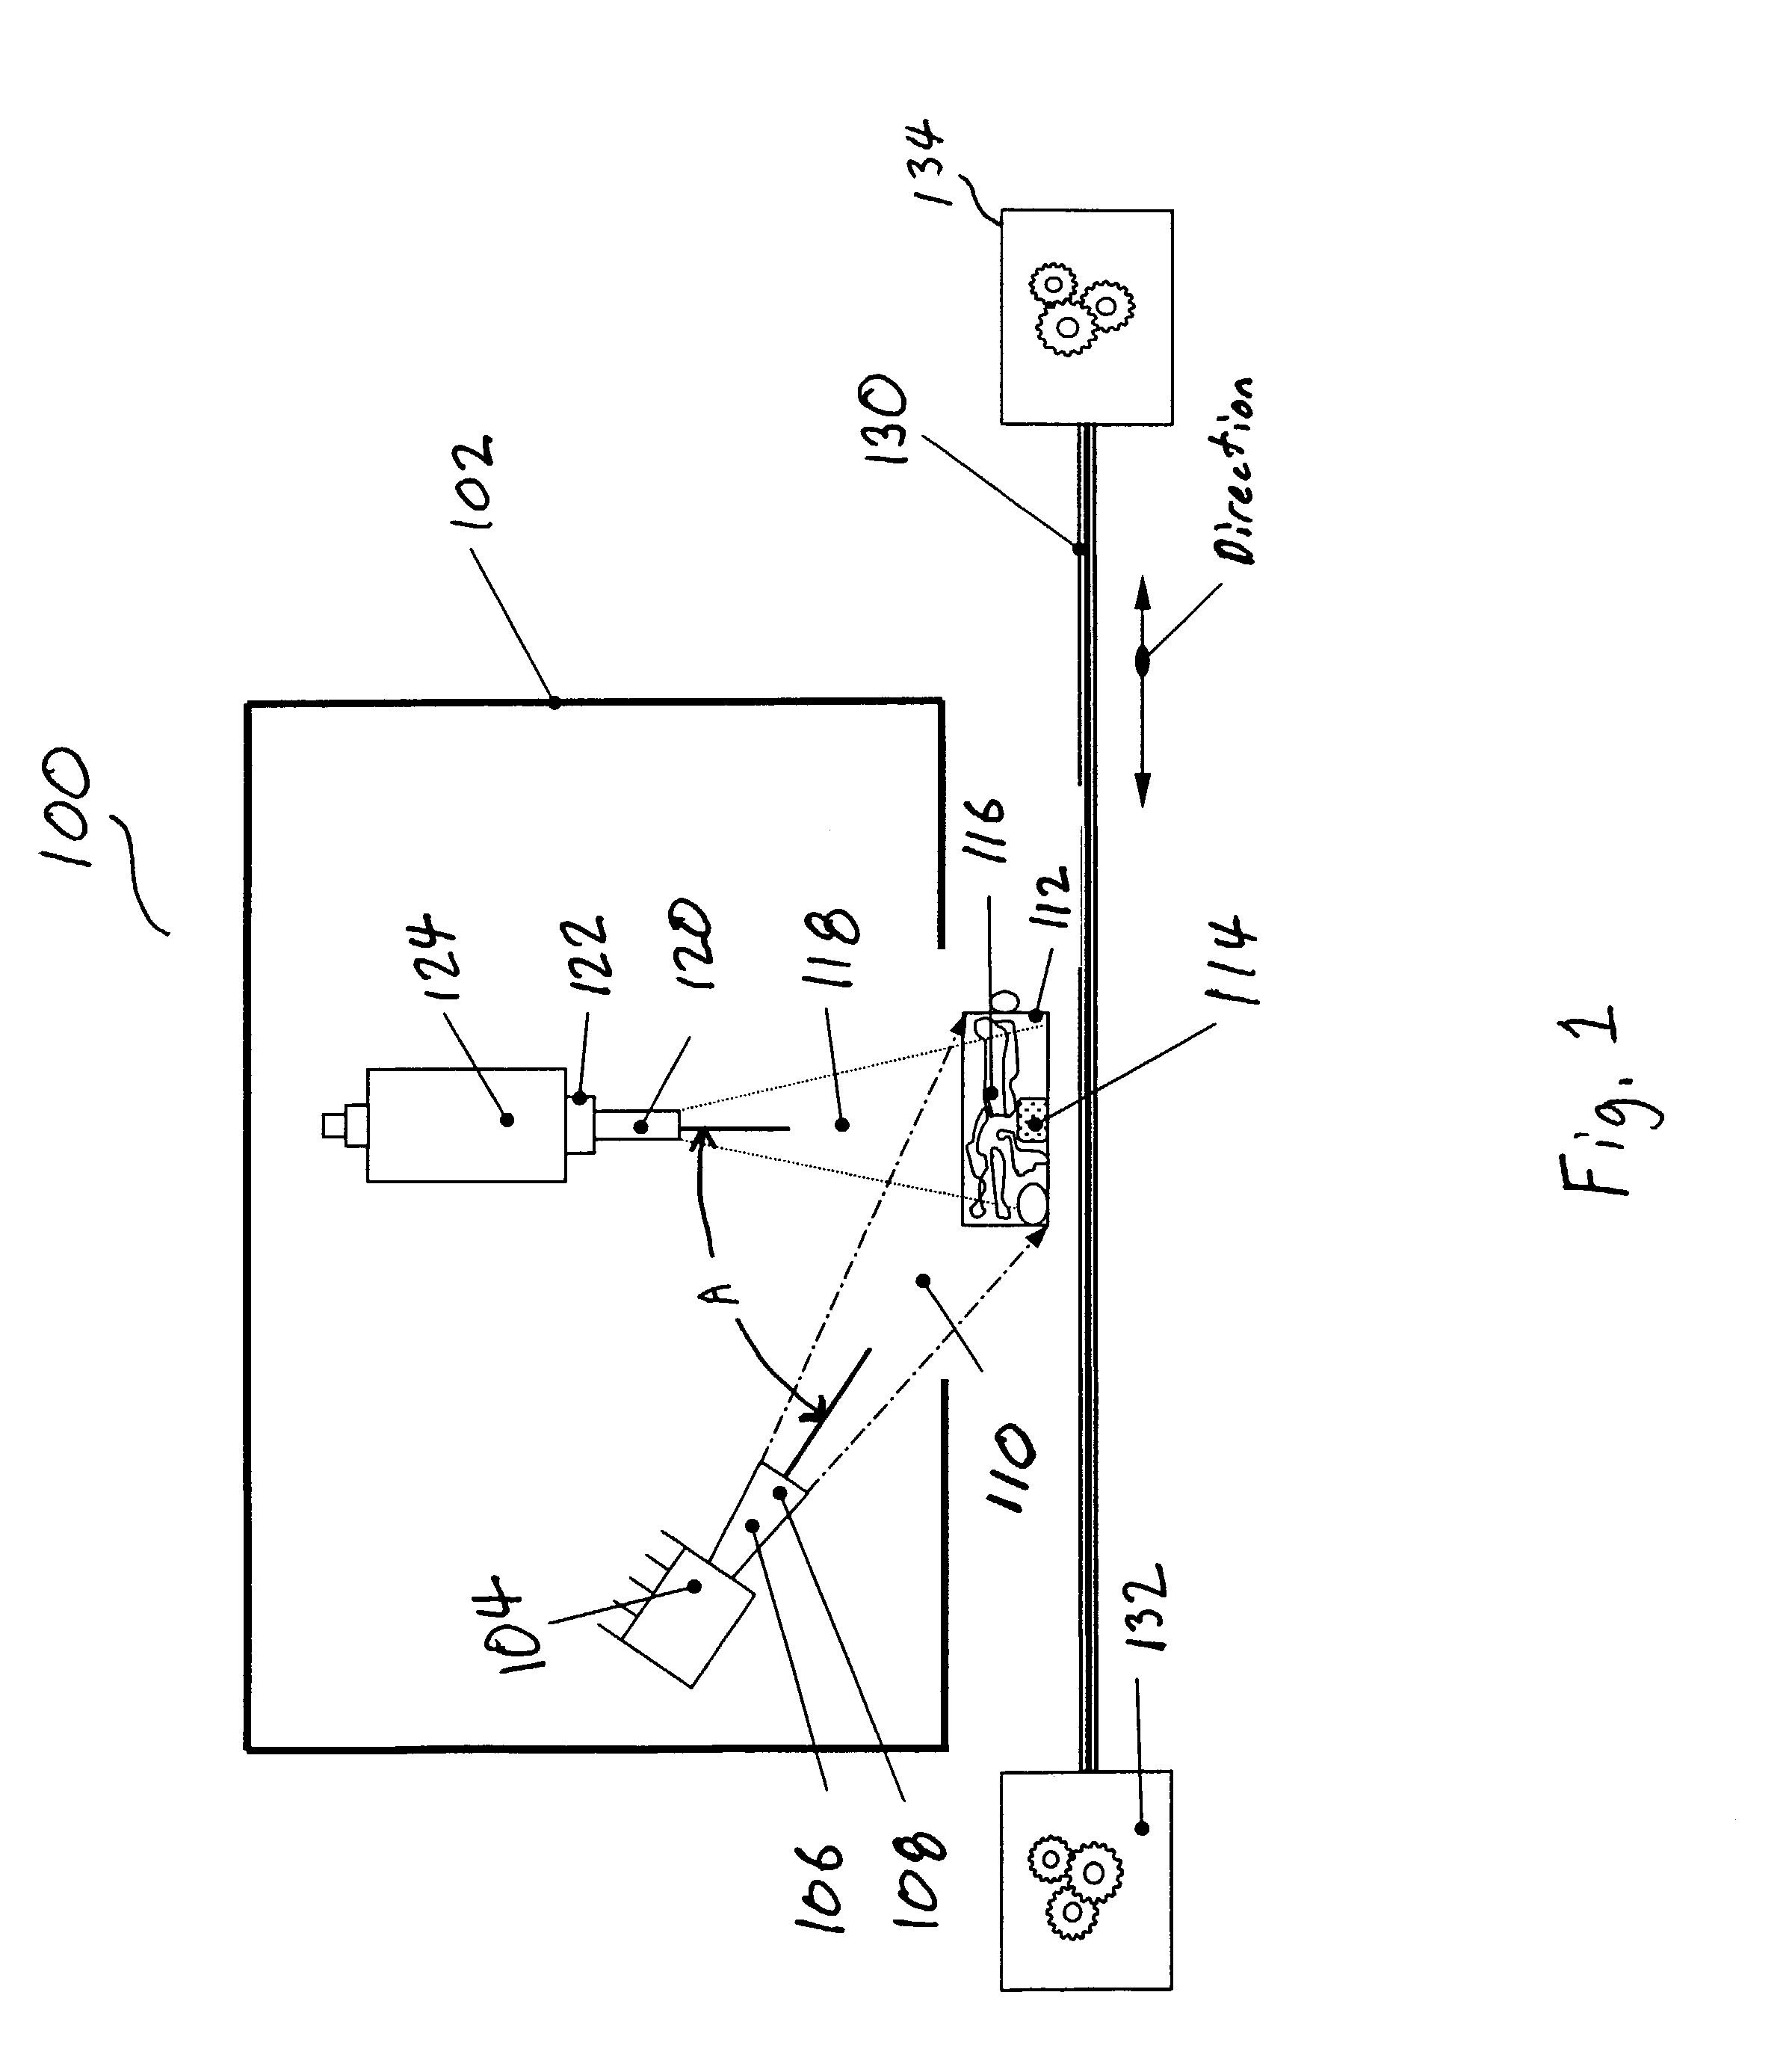 System and method for adapting a software control in an operating environment